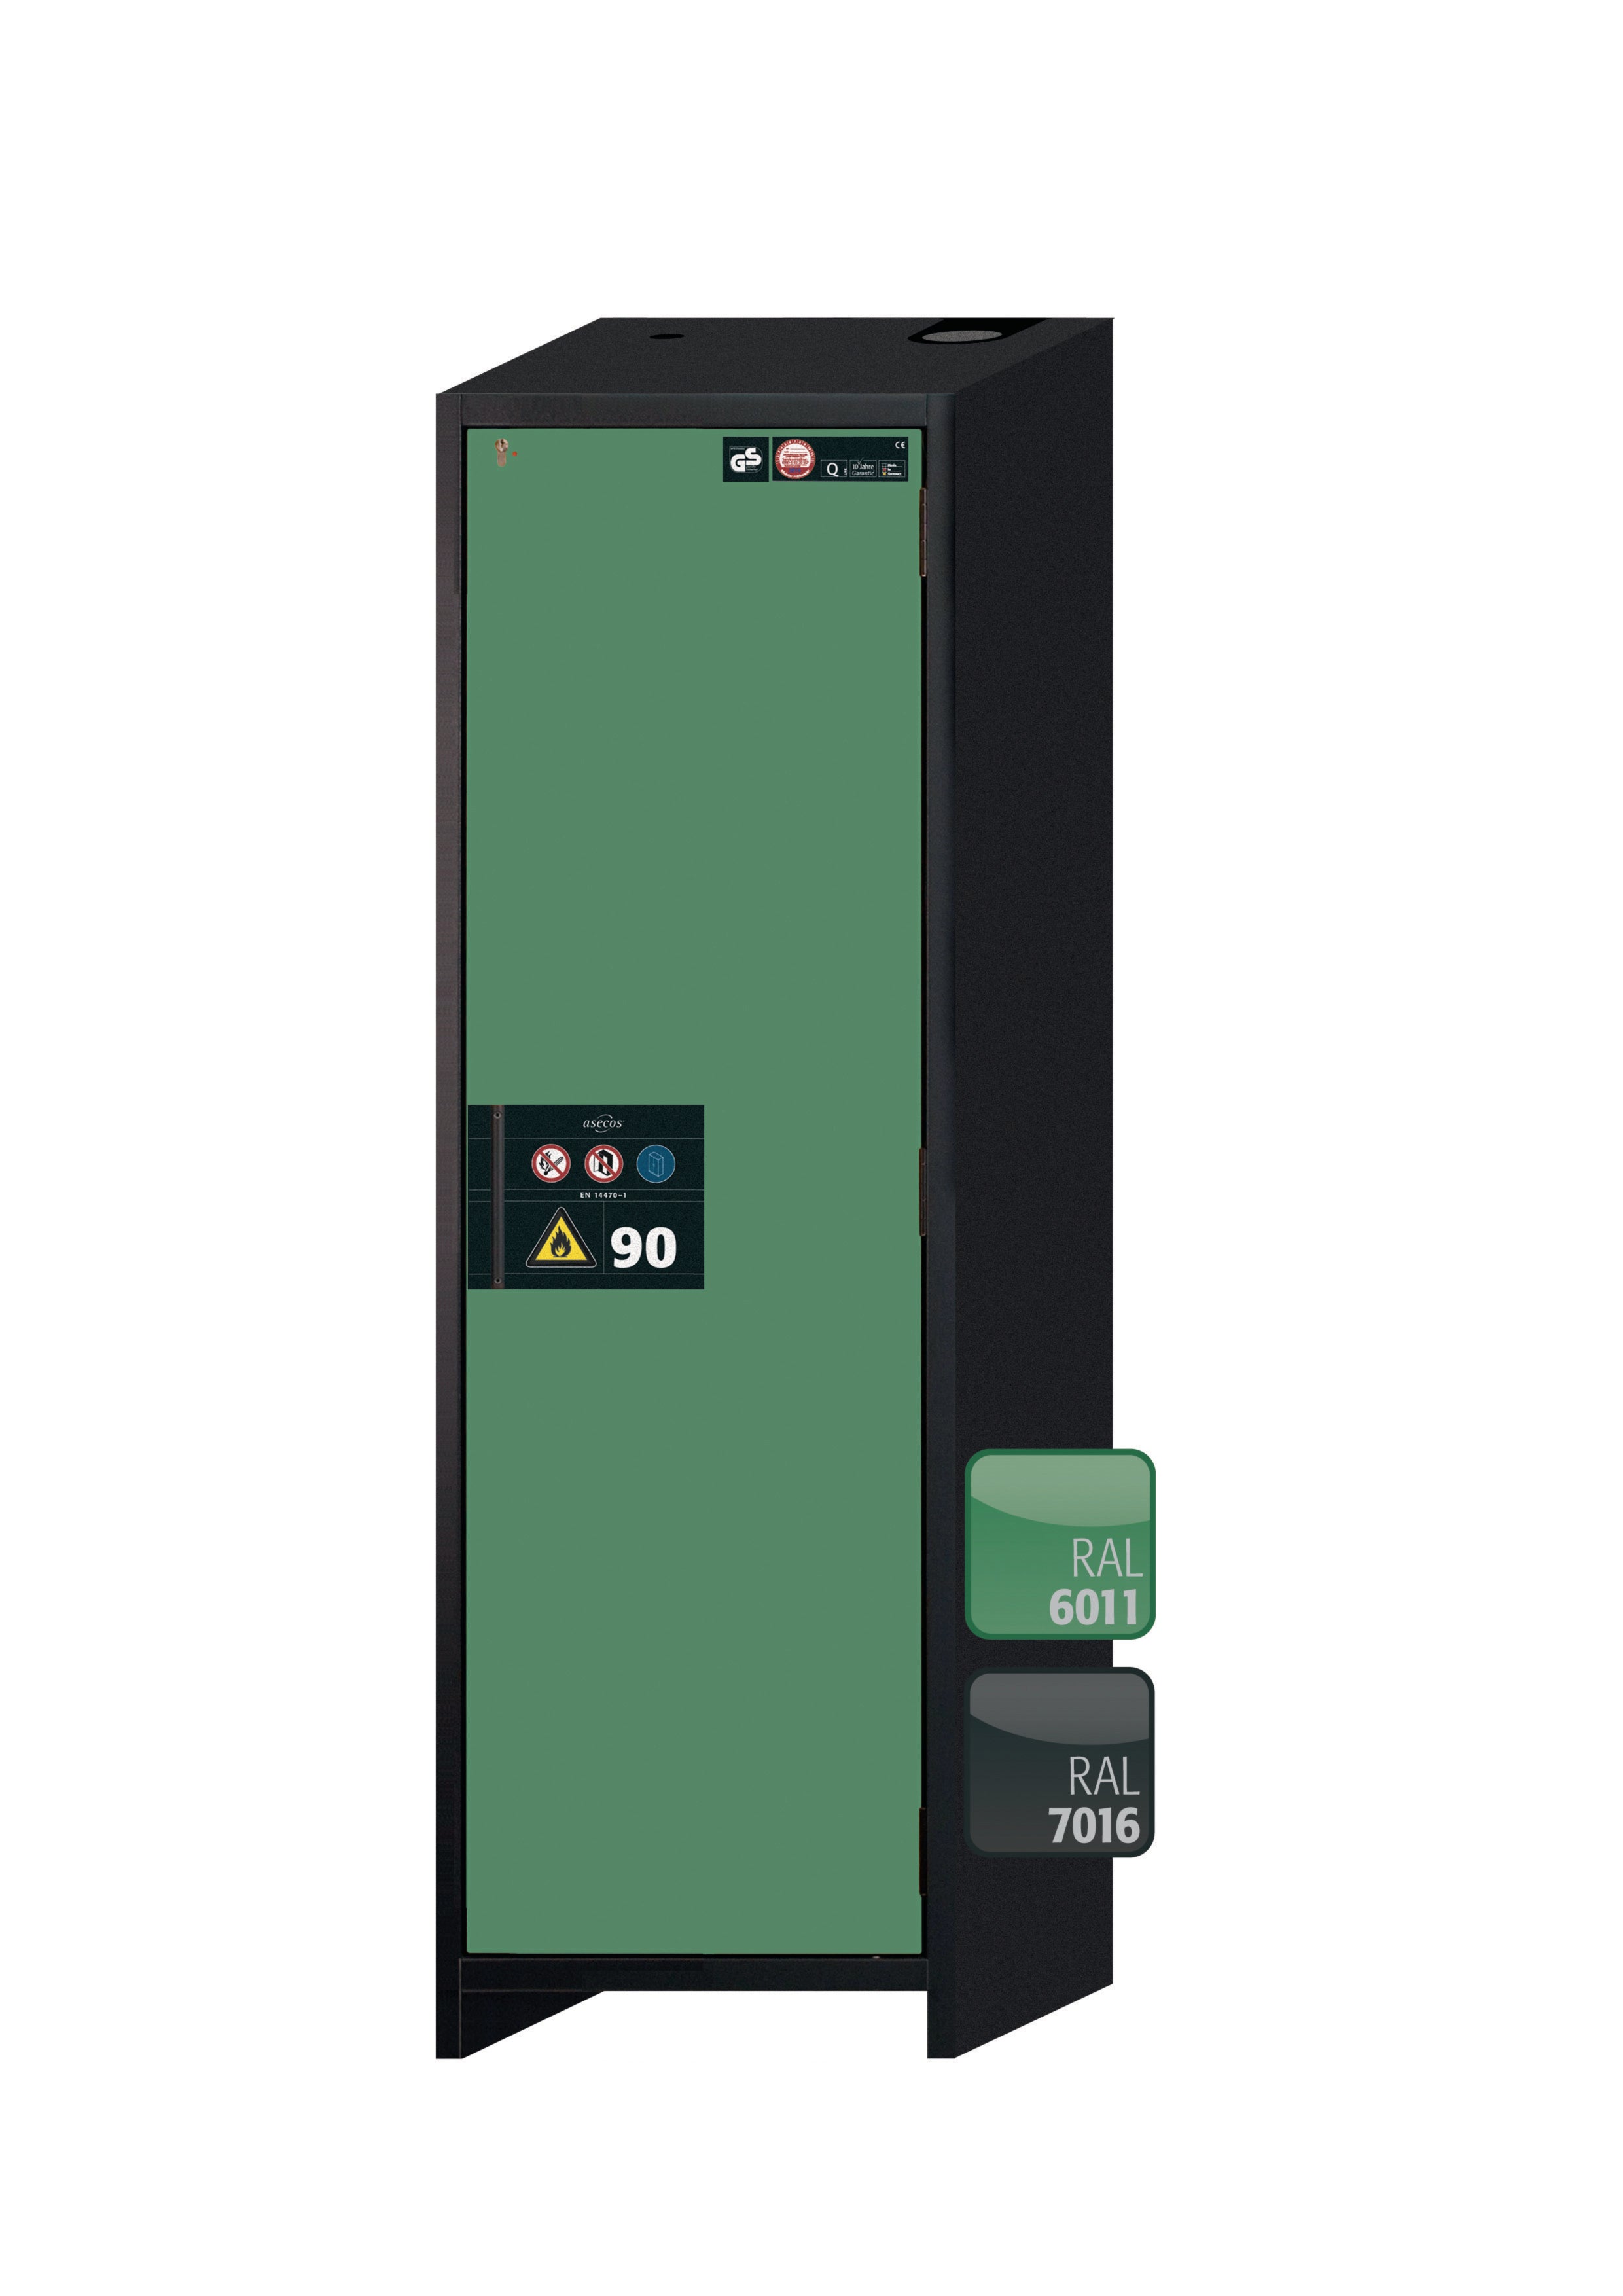 Type 90 safety storage cabinet Q-CLASSIC-90 model Q90.195.060.R in reseda green RAL 6011 with 2x tray shelf (standard) (polypropylene),